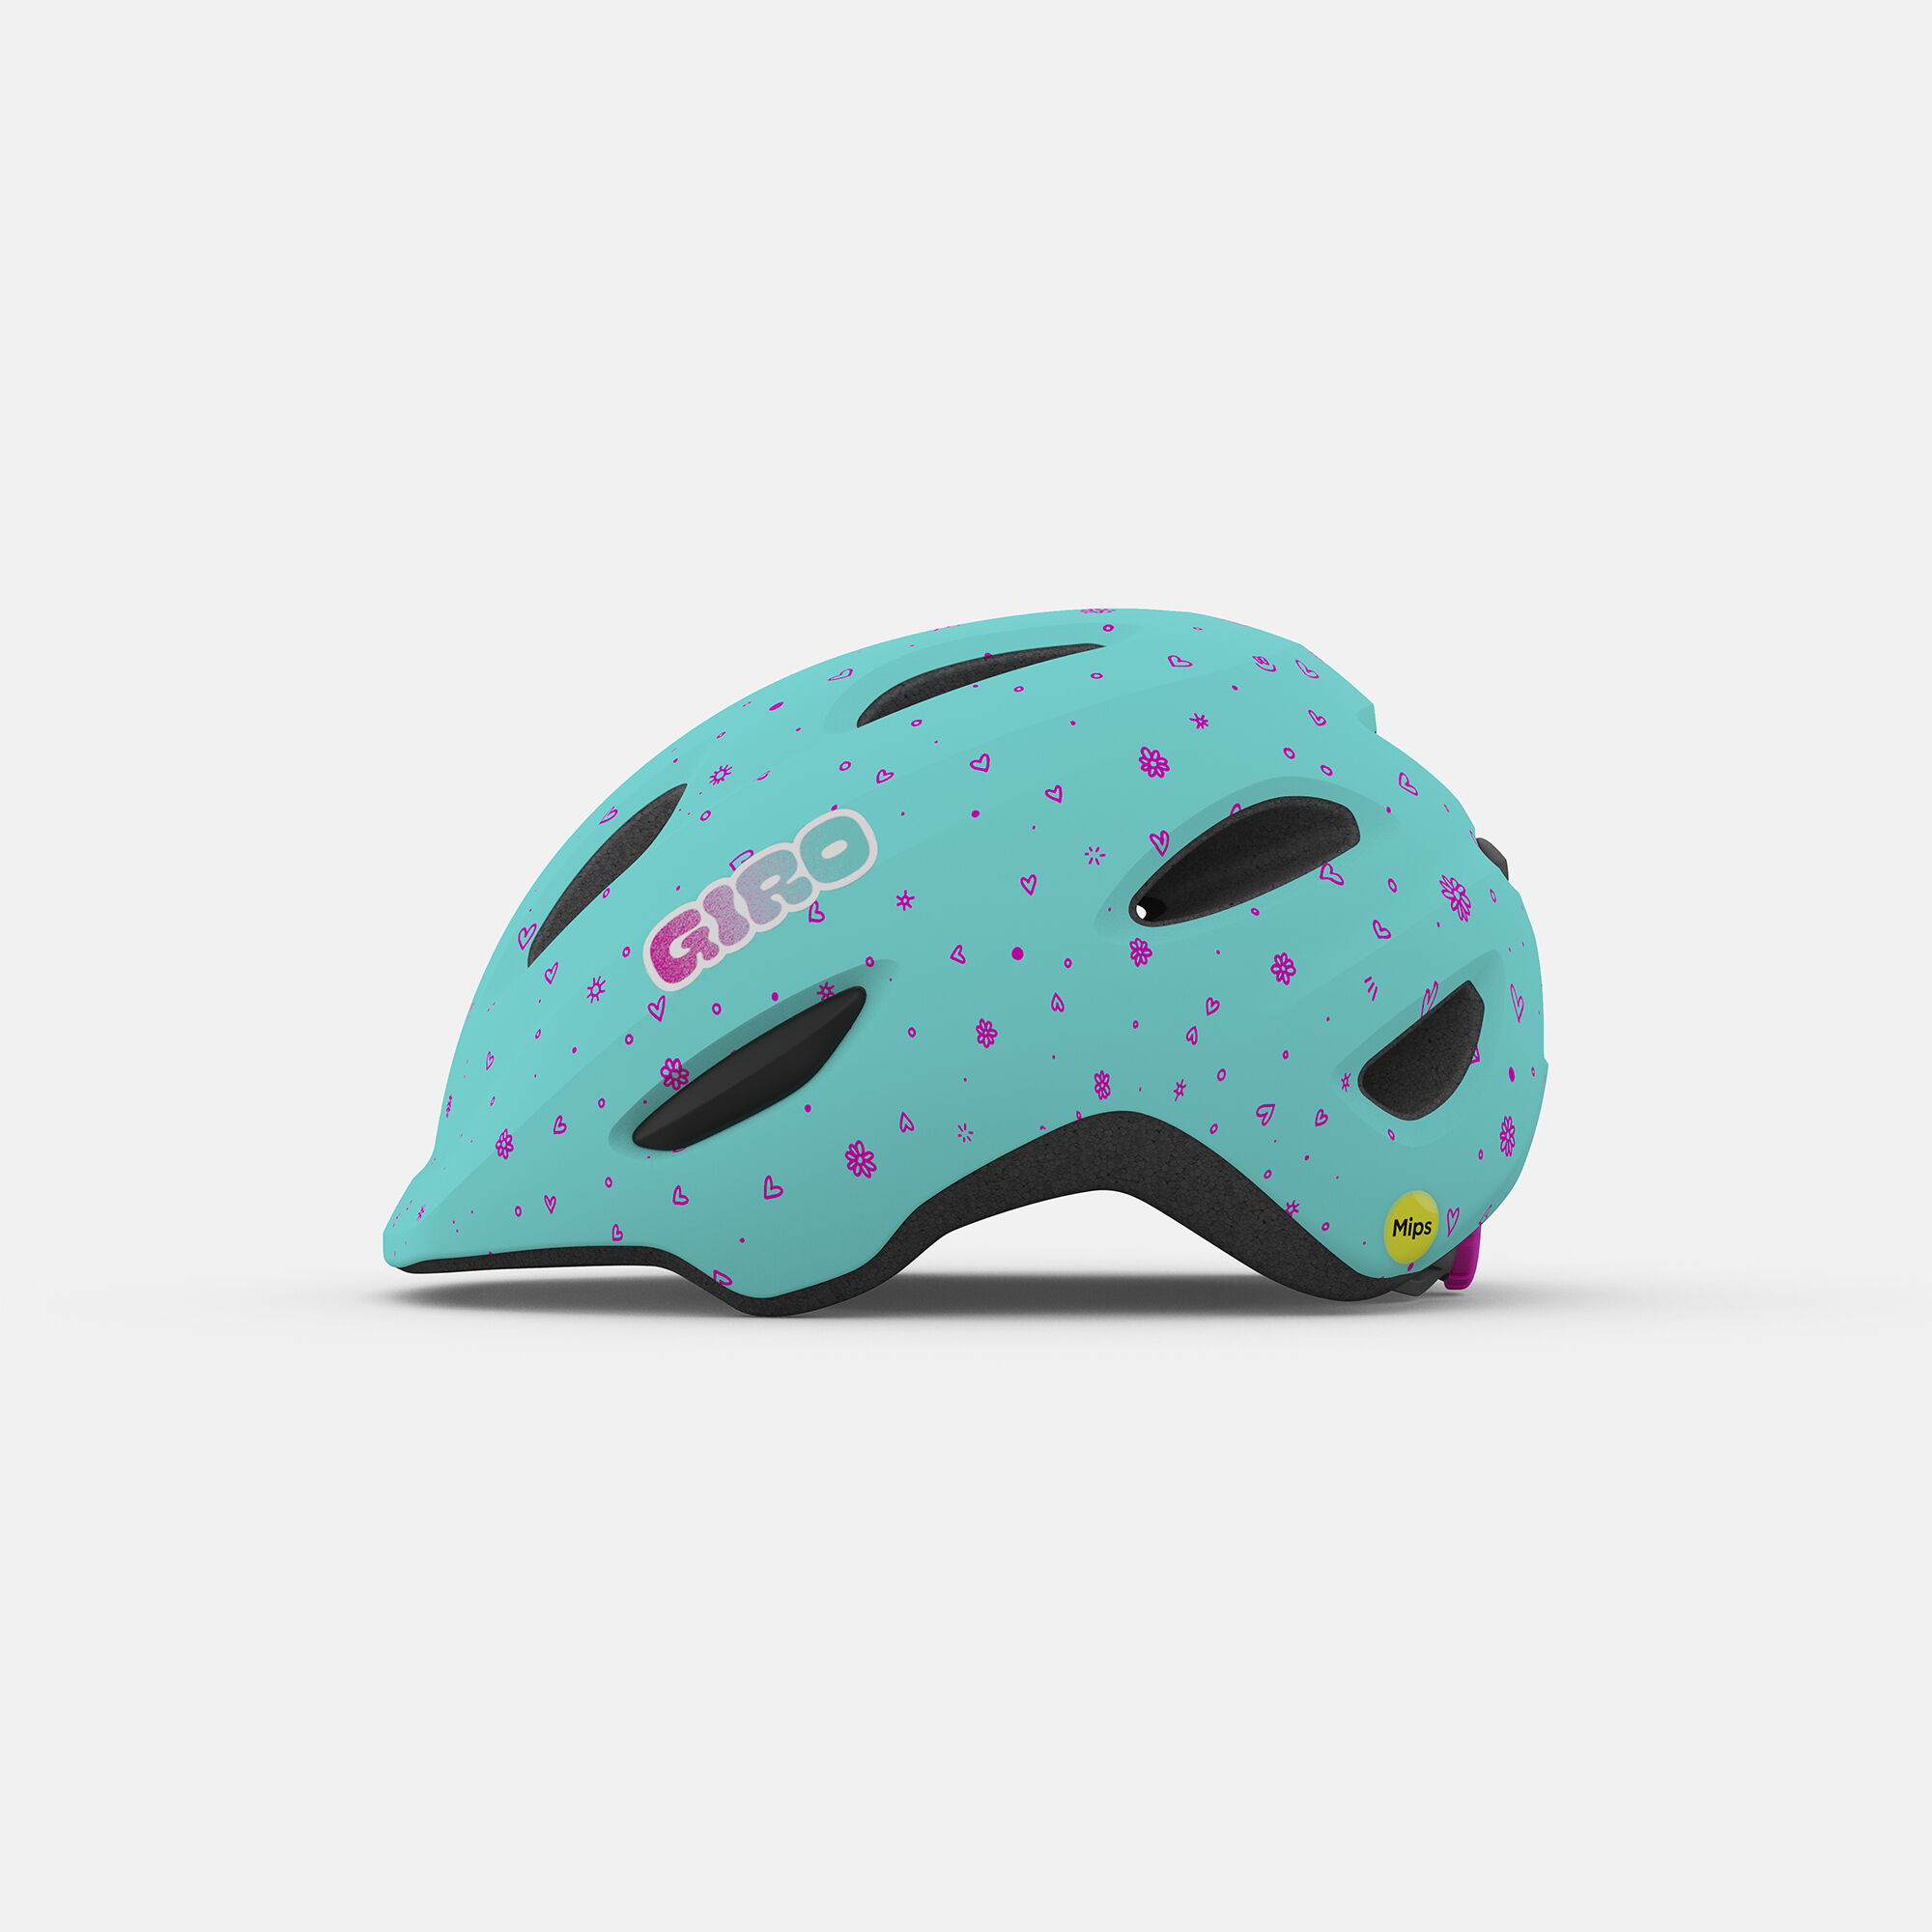 Variation Colors and Size New Giro Scamp MIPS Kids Cycling Helmet 